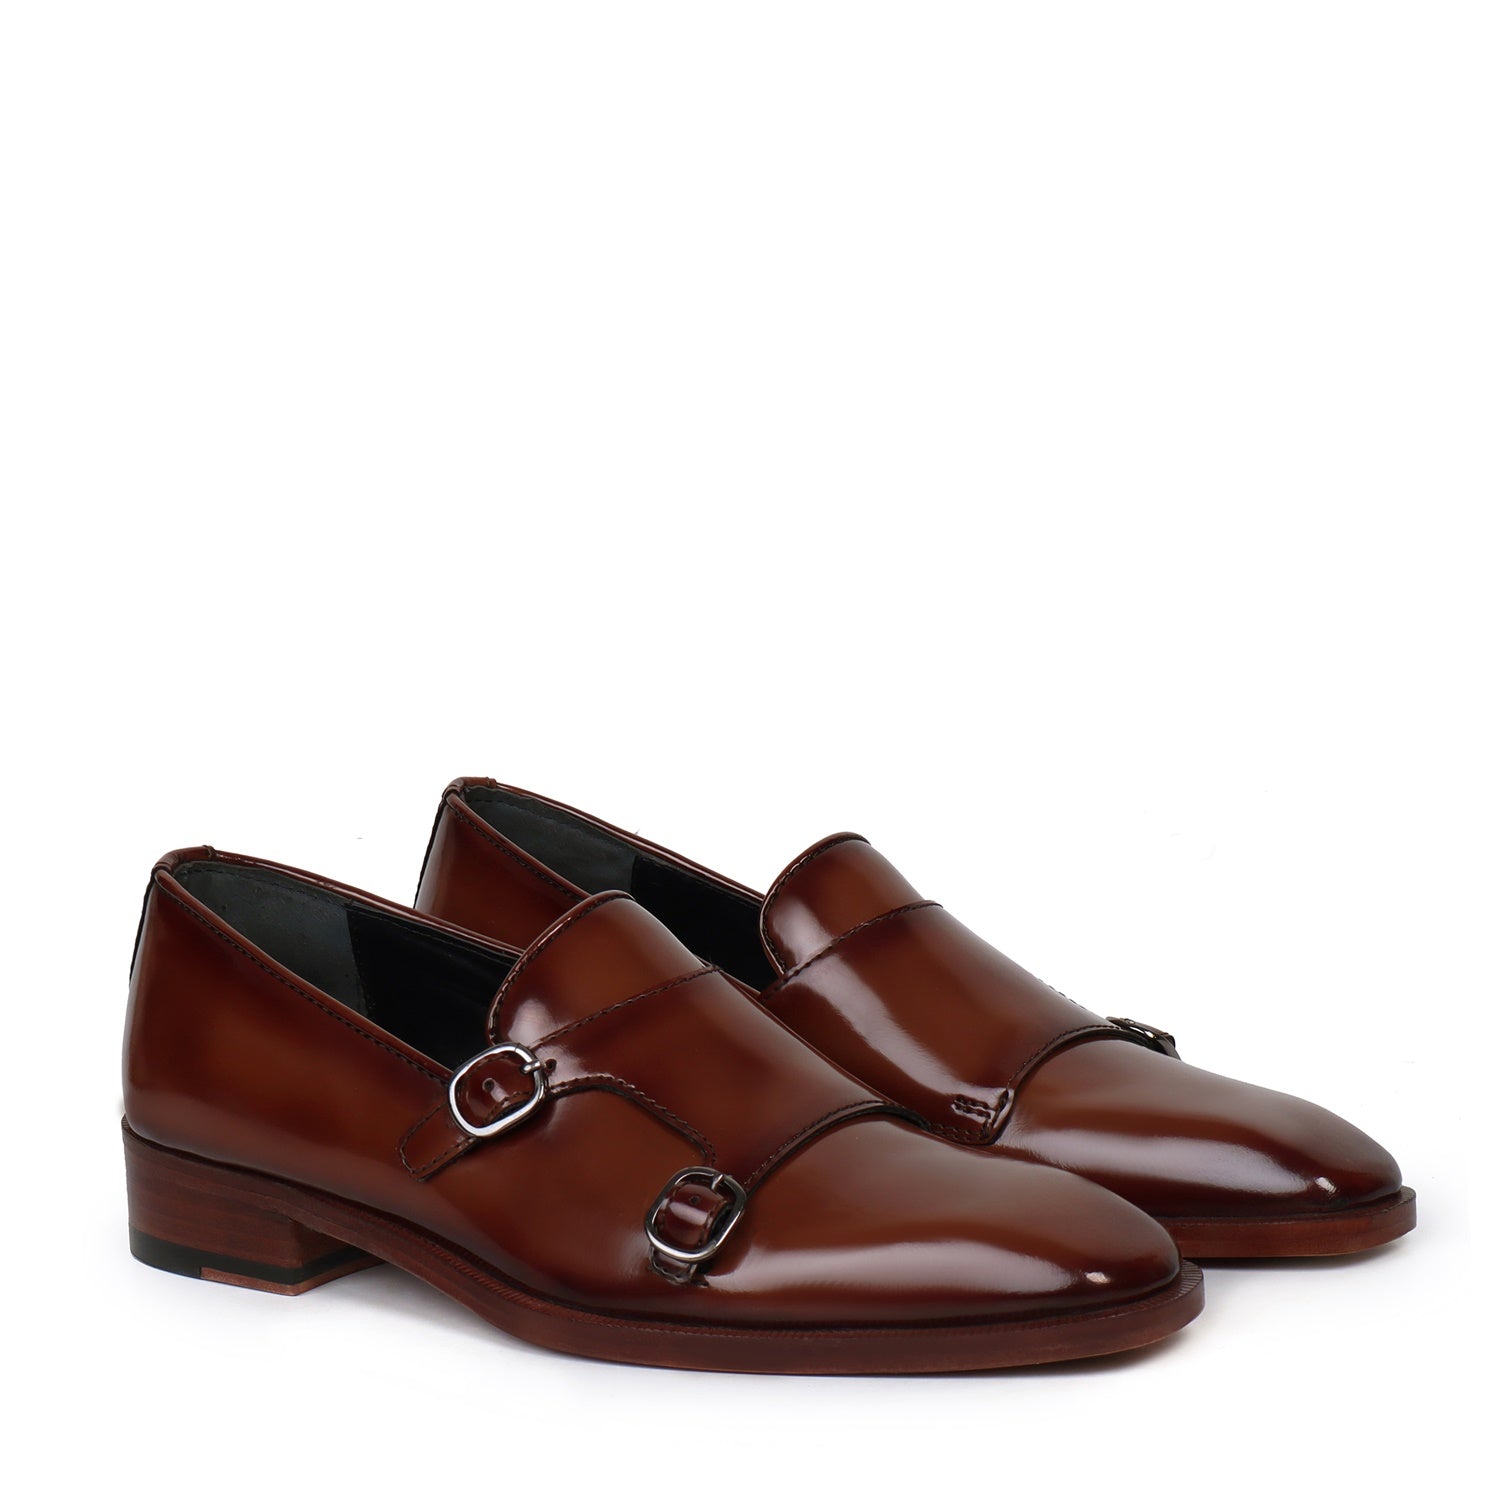 Voganow | Monk Strap Shoes - Buy Leather shoes for men